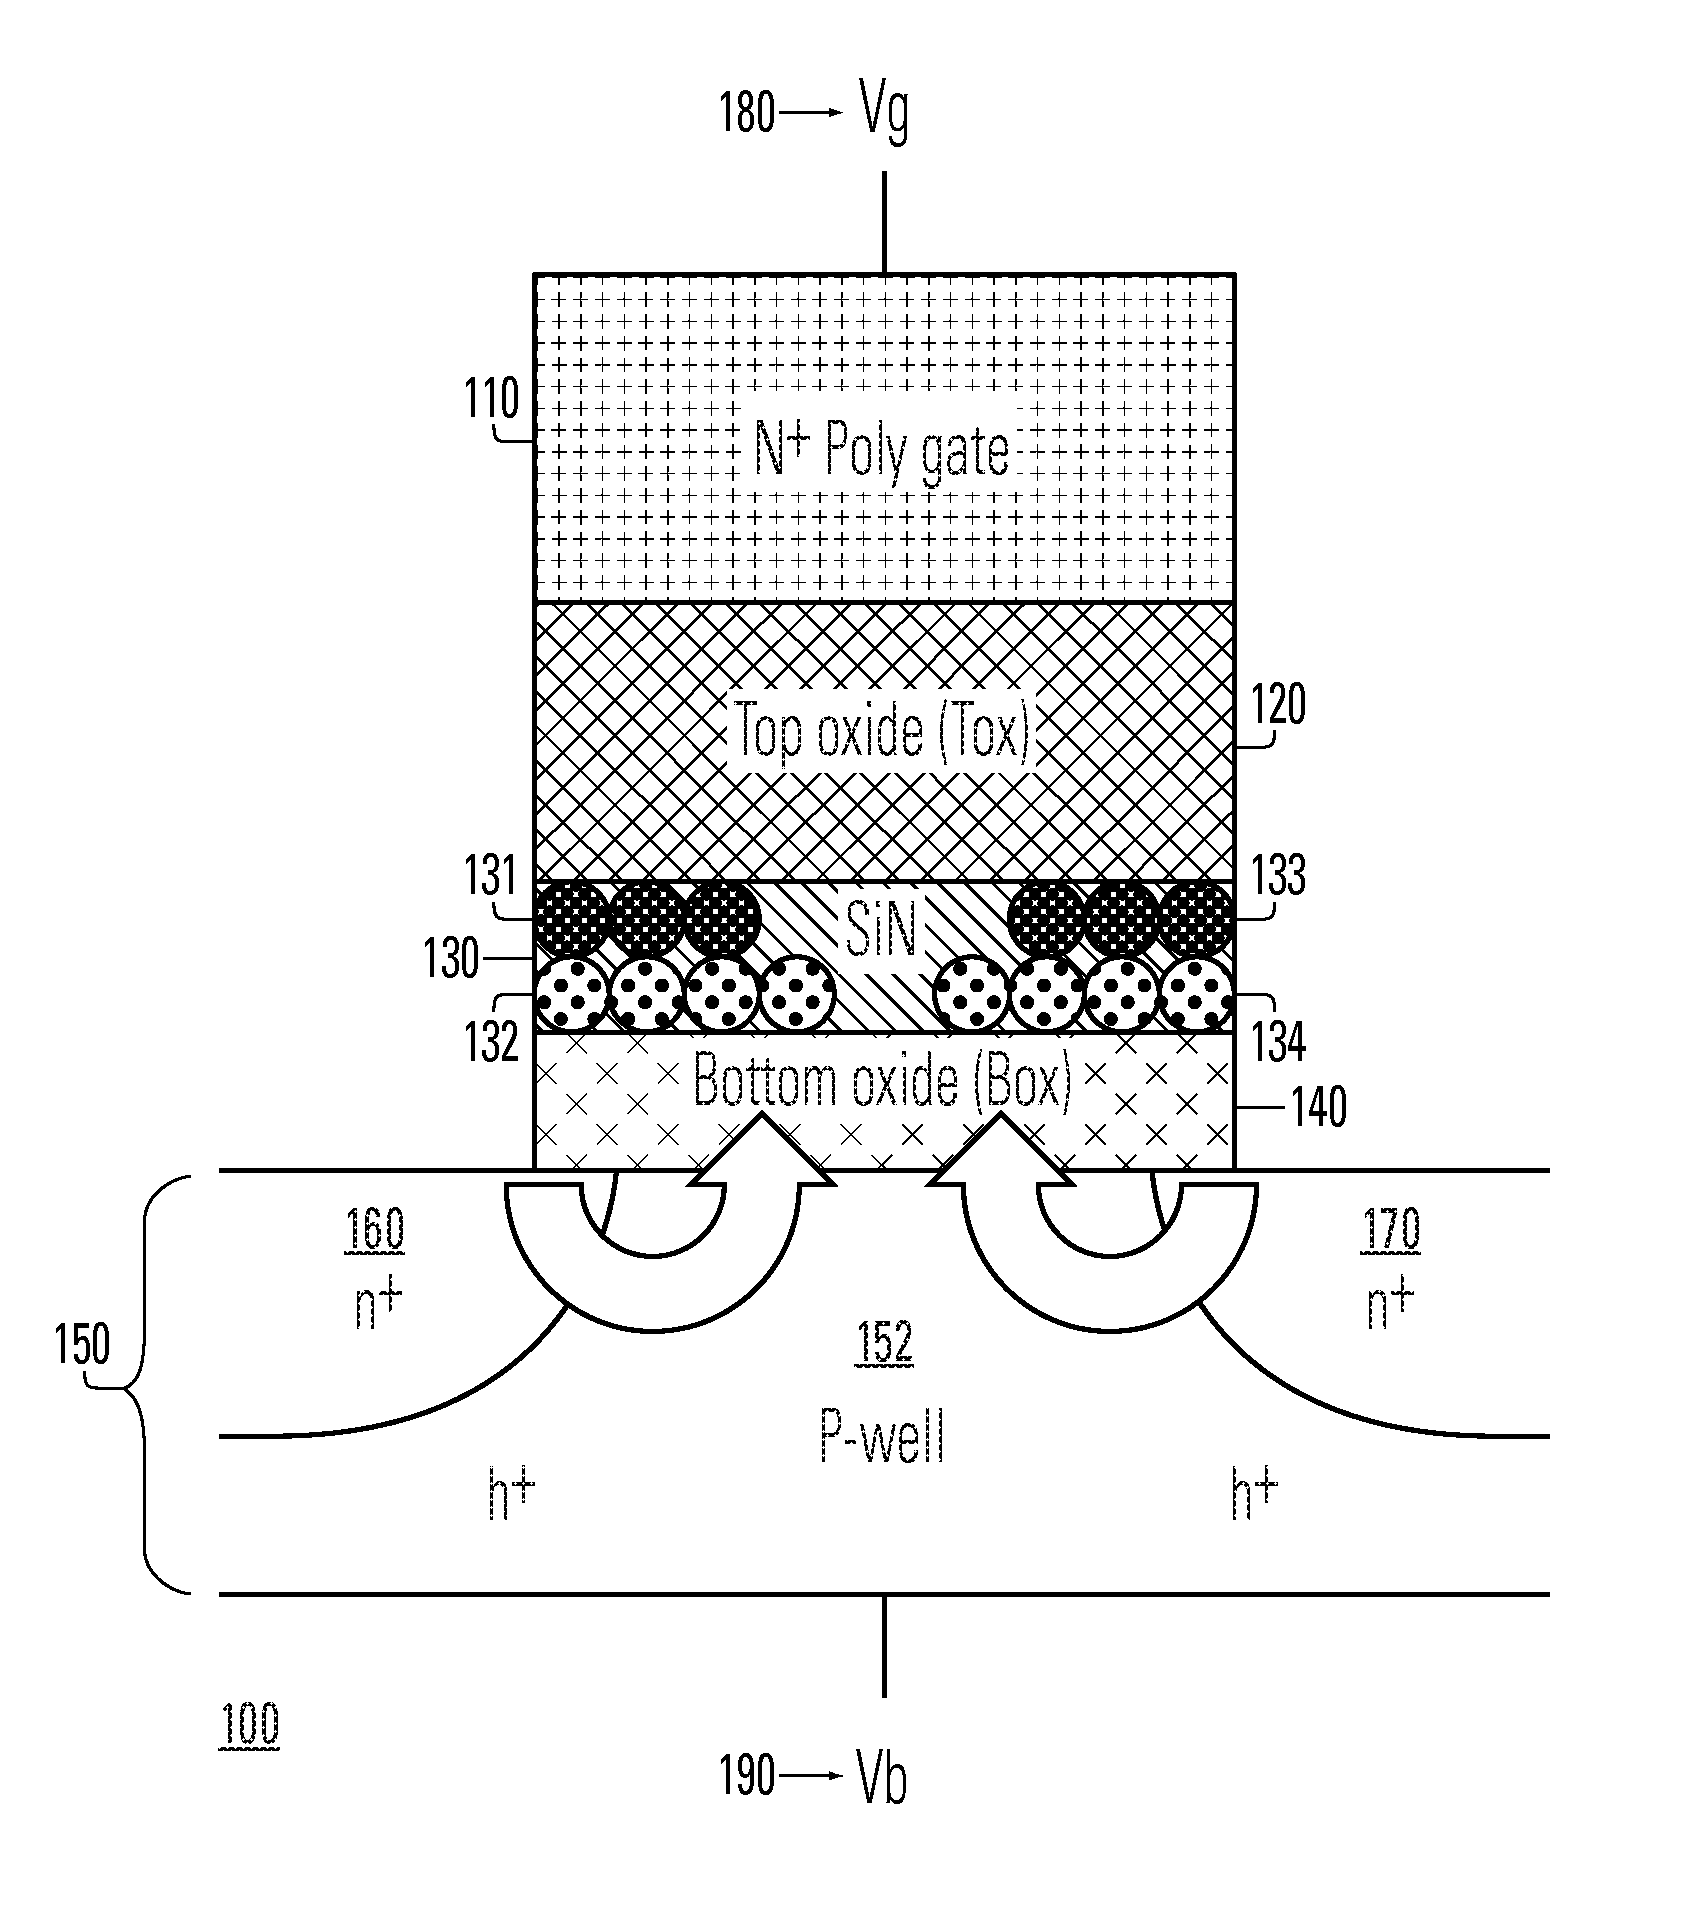 Methods to resolve hard-to-erase condition in charge trapping non-volatile memory